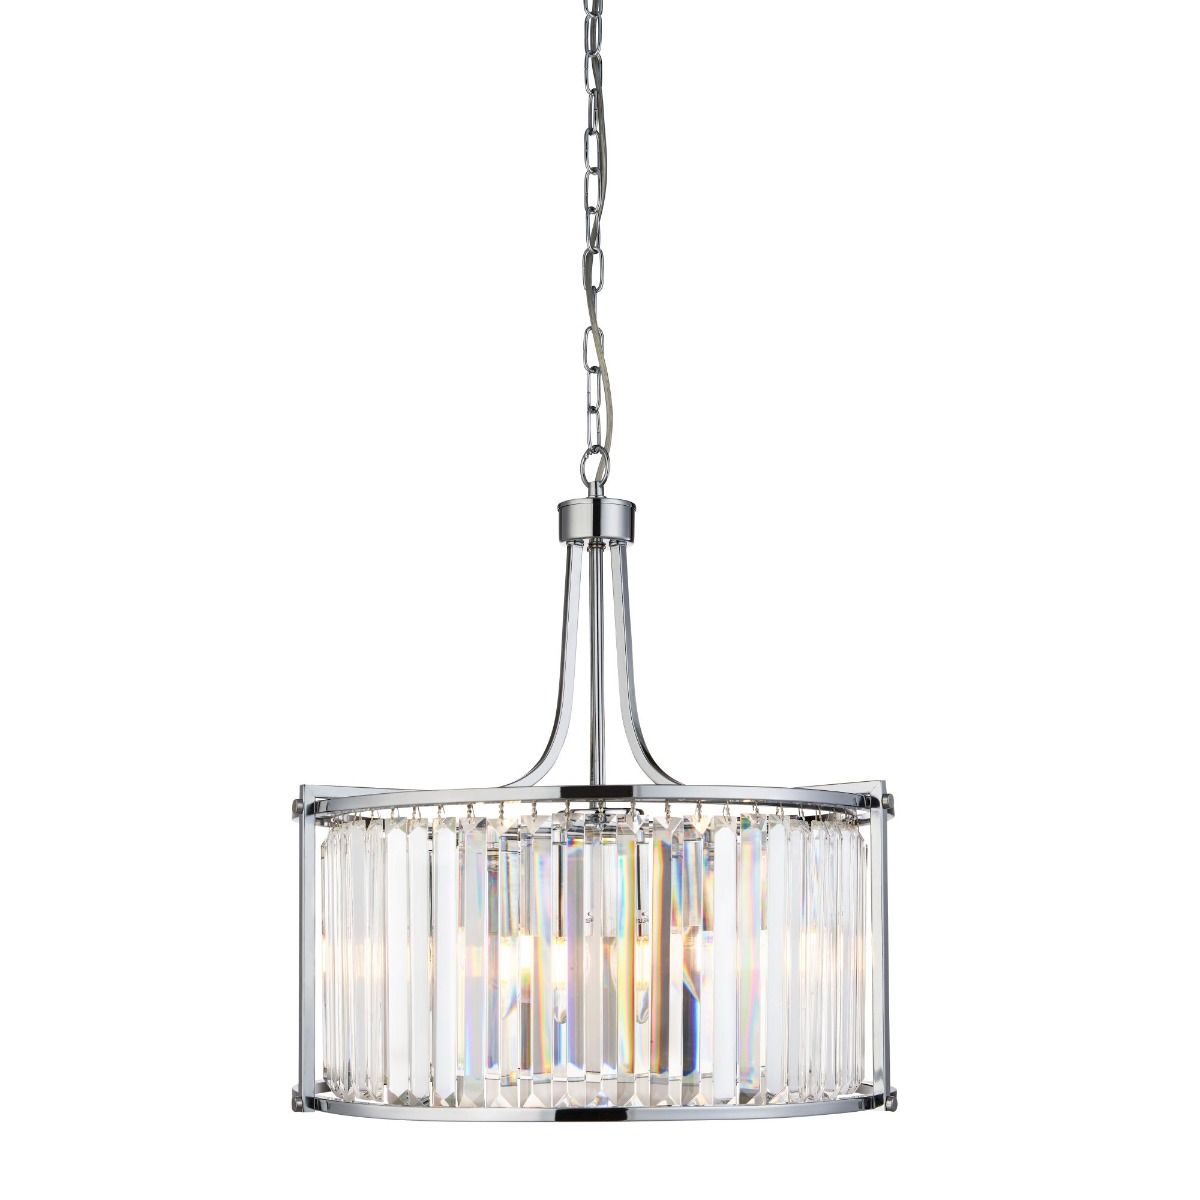 Victoria 5 Light Polished Chrome and Crystal Drum Ceiling Light Pendant